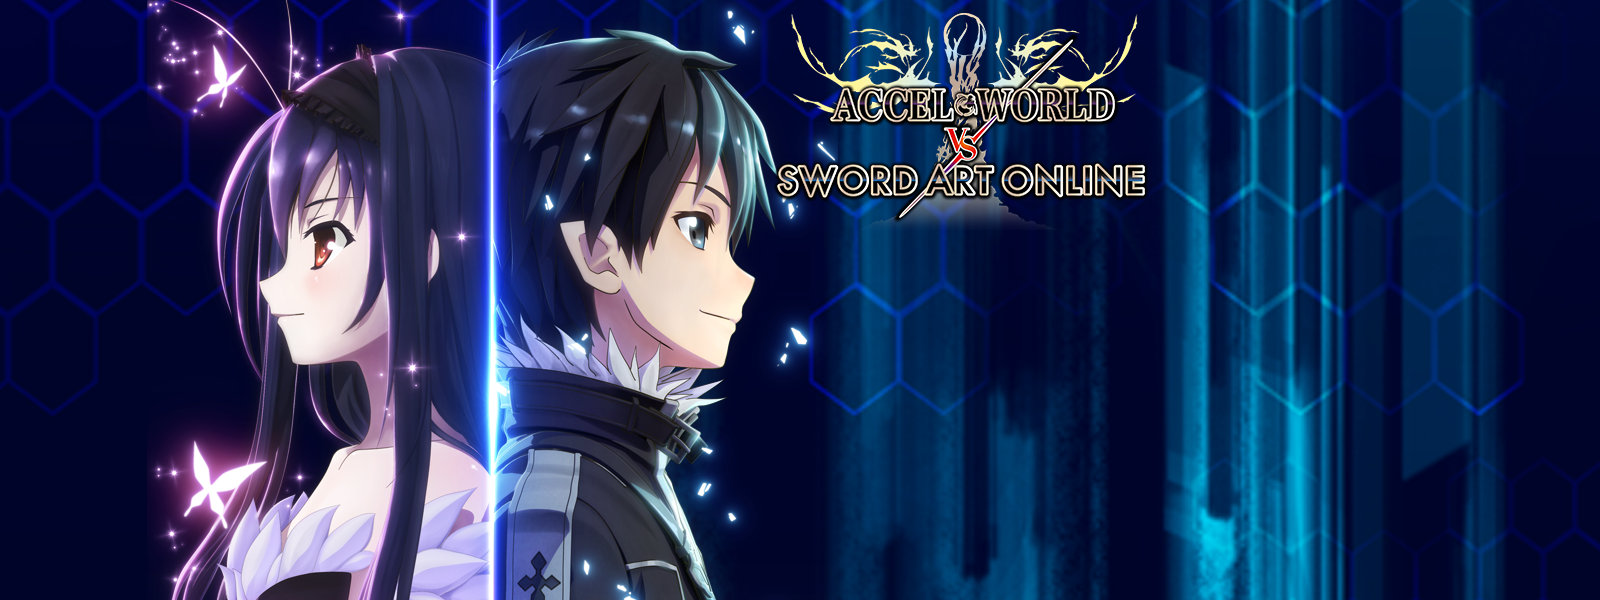 New Sword Art Online mobile game invites you to unravel a mystery